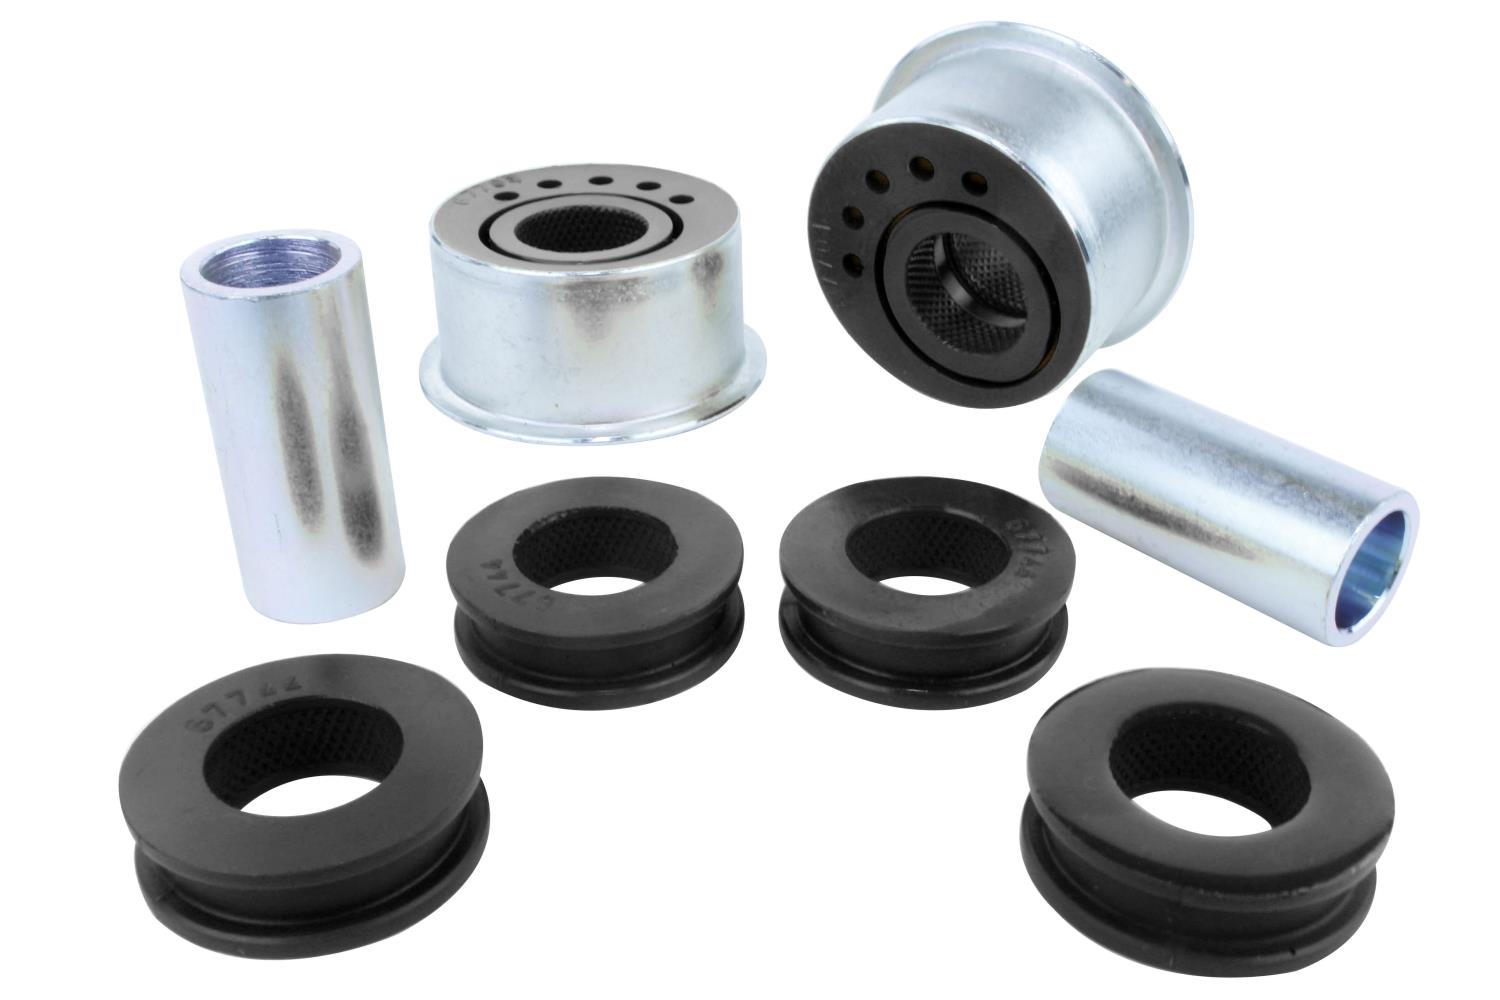 KCA434 Front Control Arm Lower Inner Front Bushing Fits Select Scion, Subaru, Toyota Models